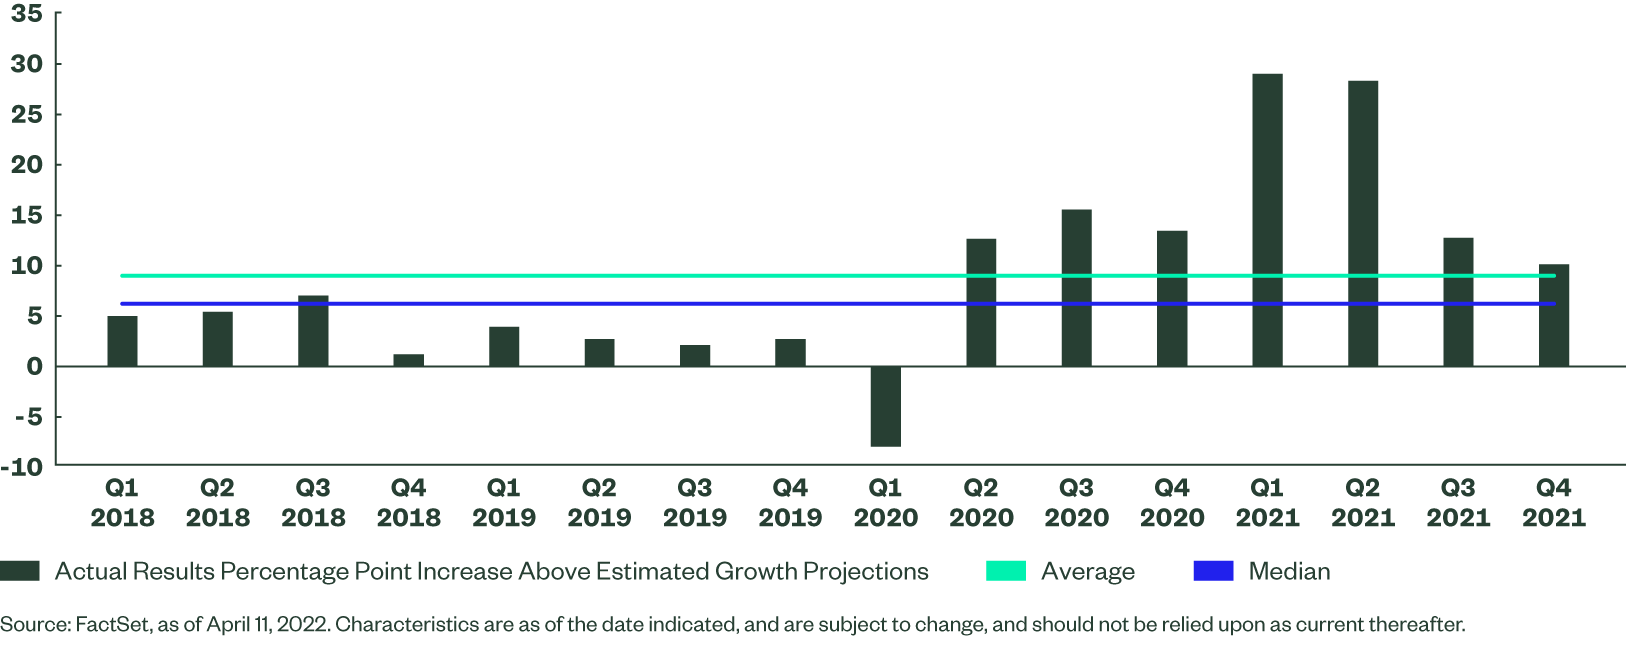 Actual Results Percentage Point Increase Above Estimated Growth Projections (%)